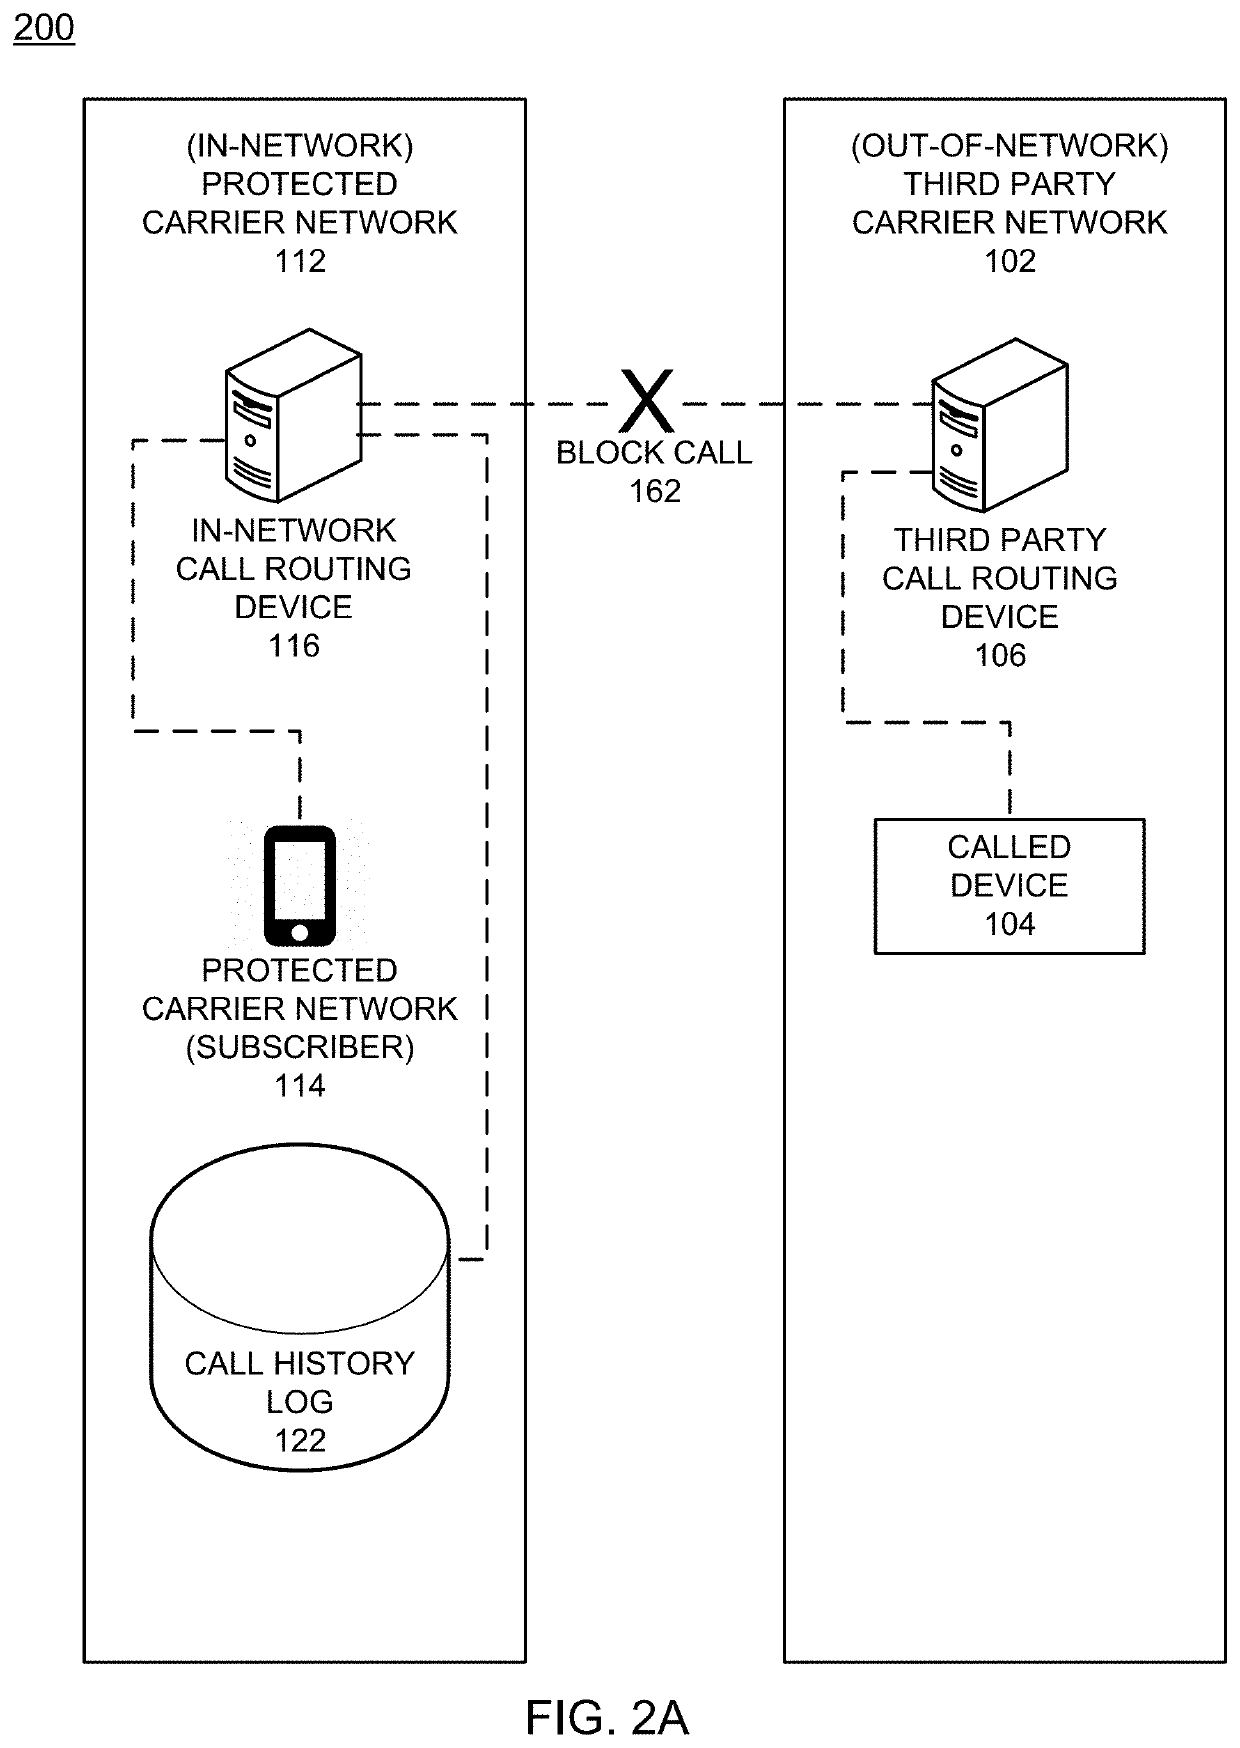 Call screening service for detecting fraudulent inbound/outbound communications with subscriber devices